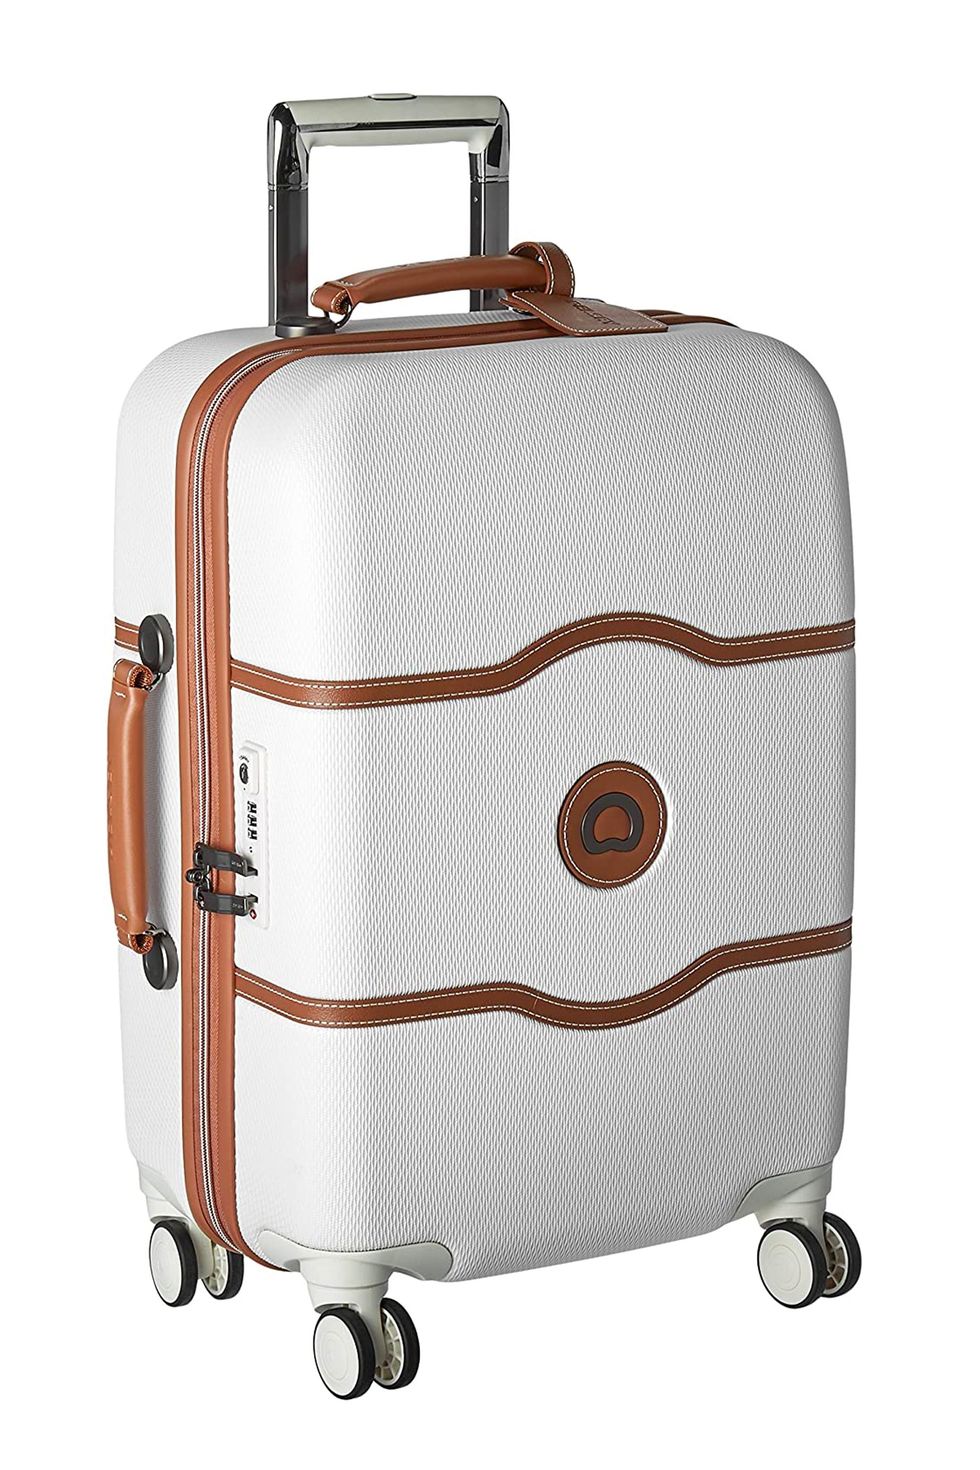 Best trolley bags come at great price, offer lot of space and look stylish  too